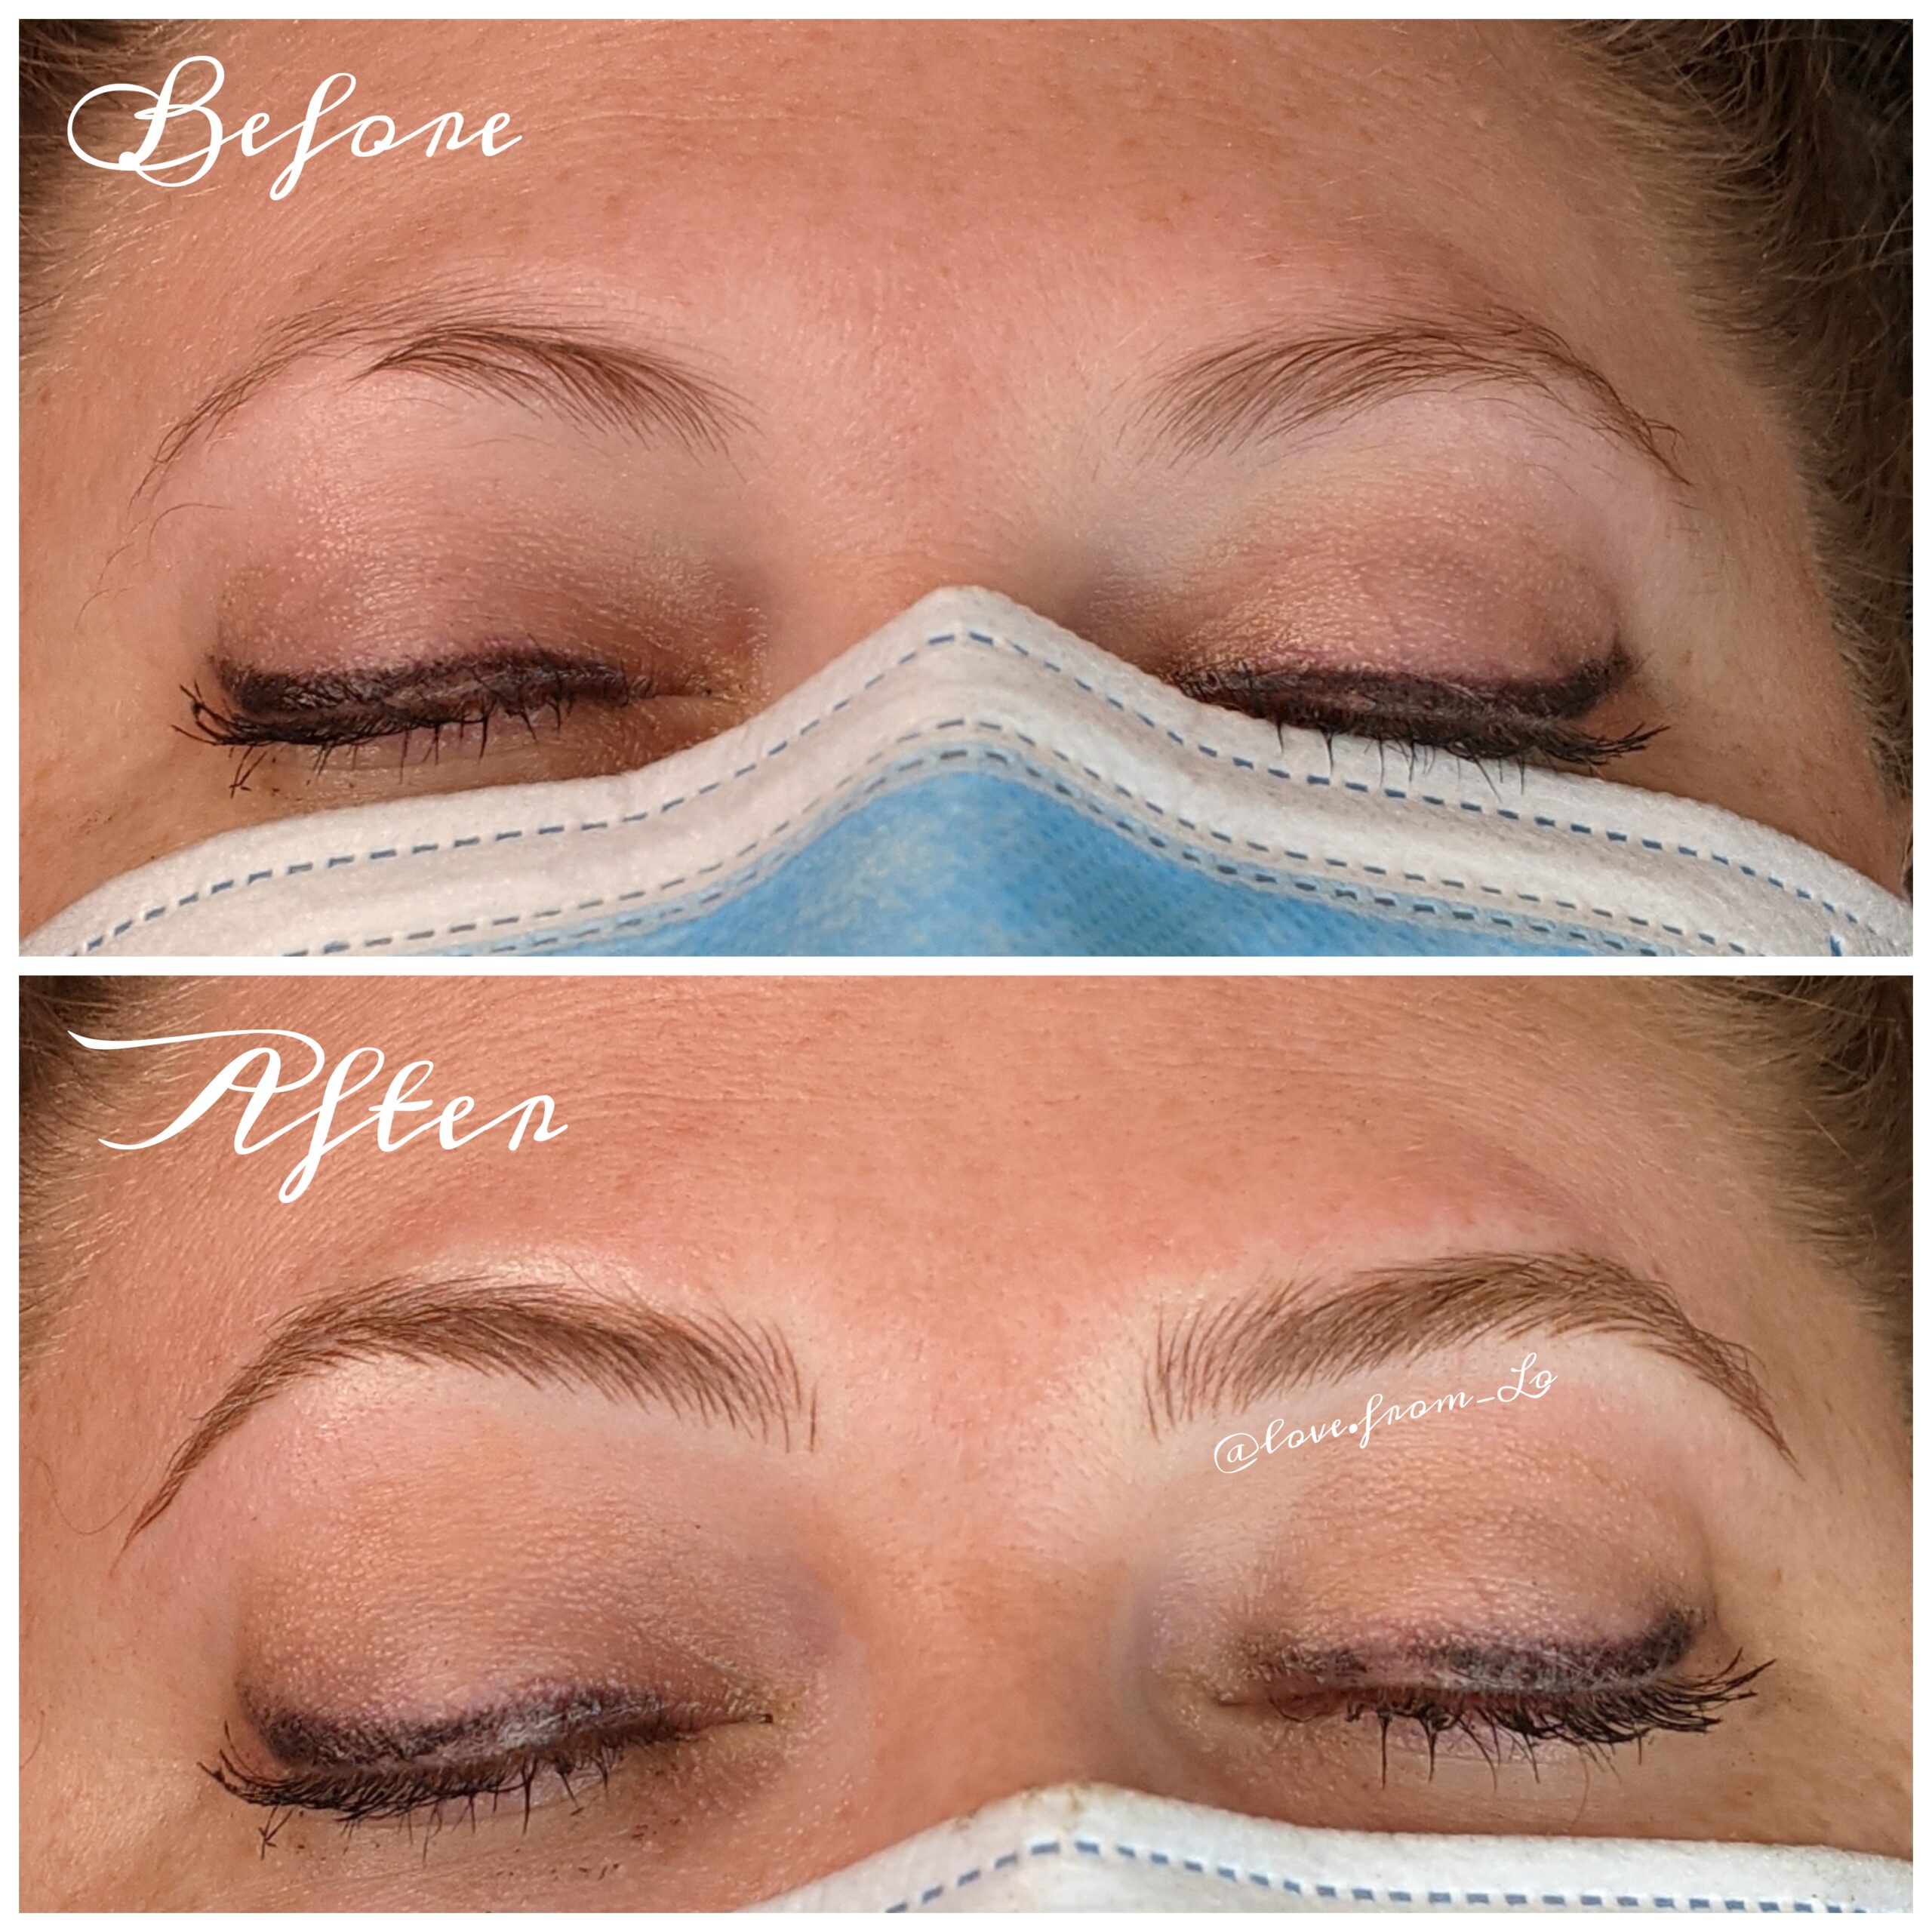 Microblading by Lo at Bewitched Esthetics in Boise, Idaho